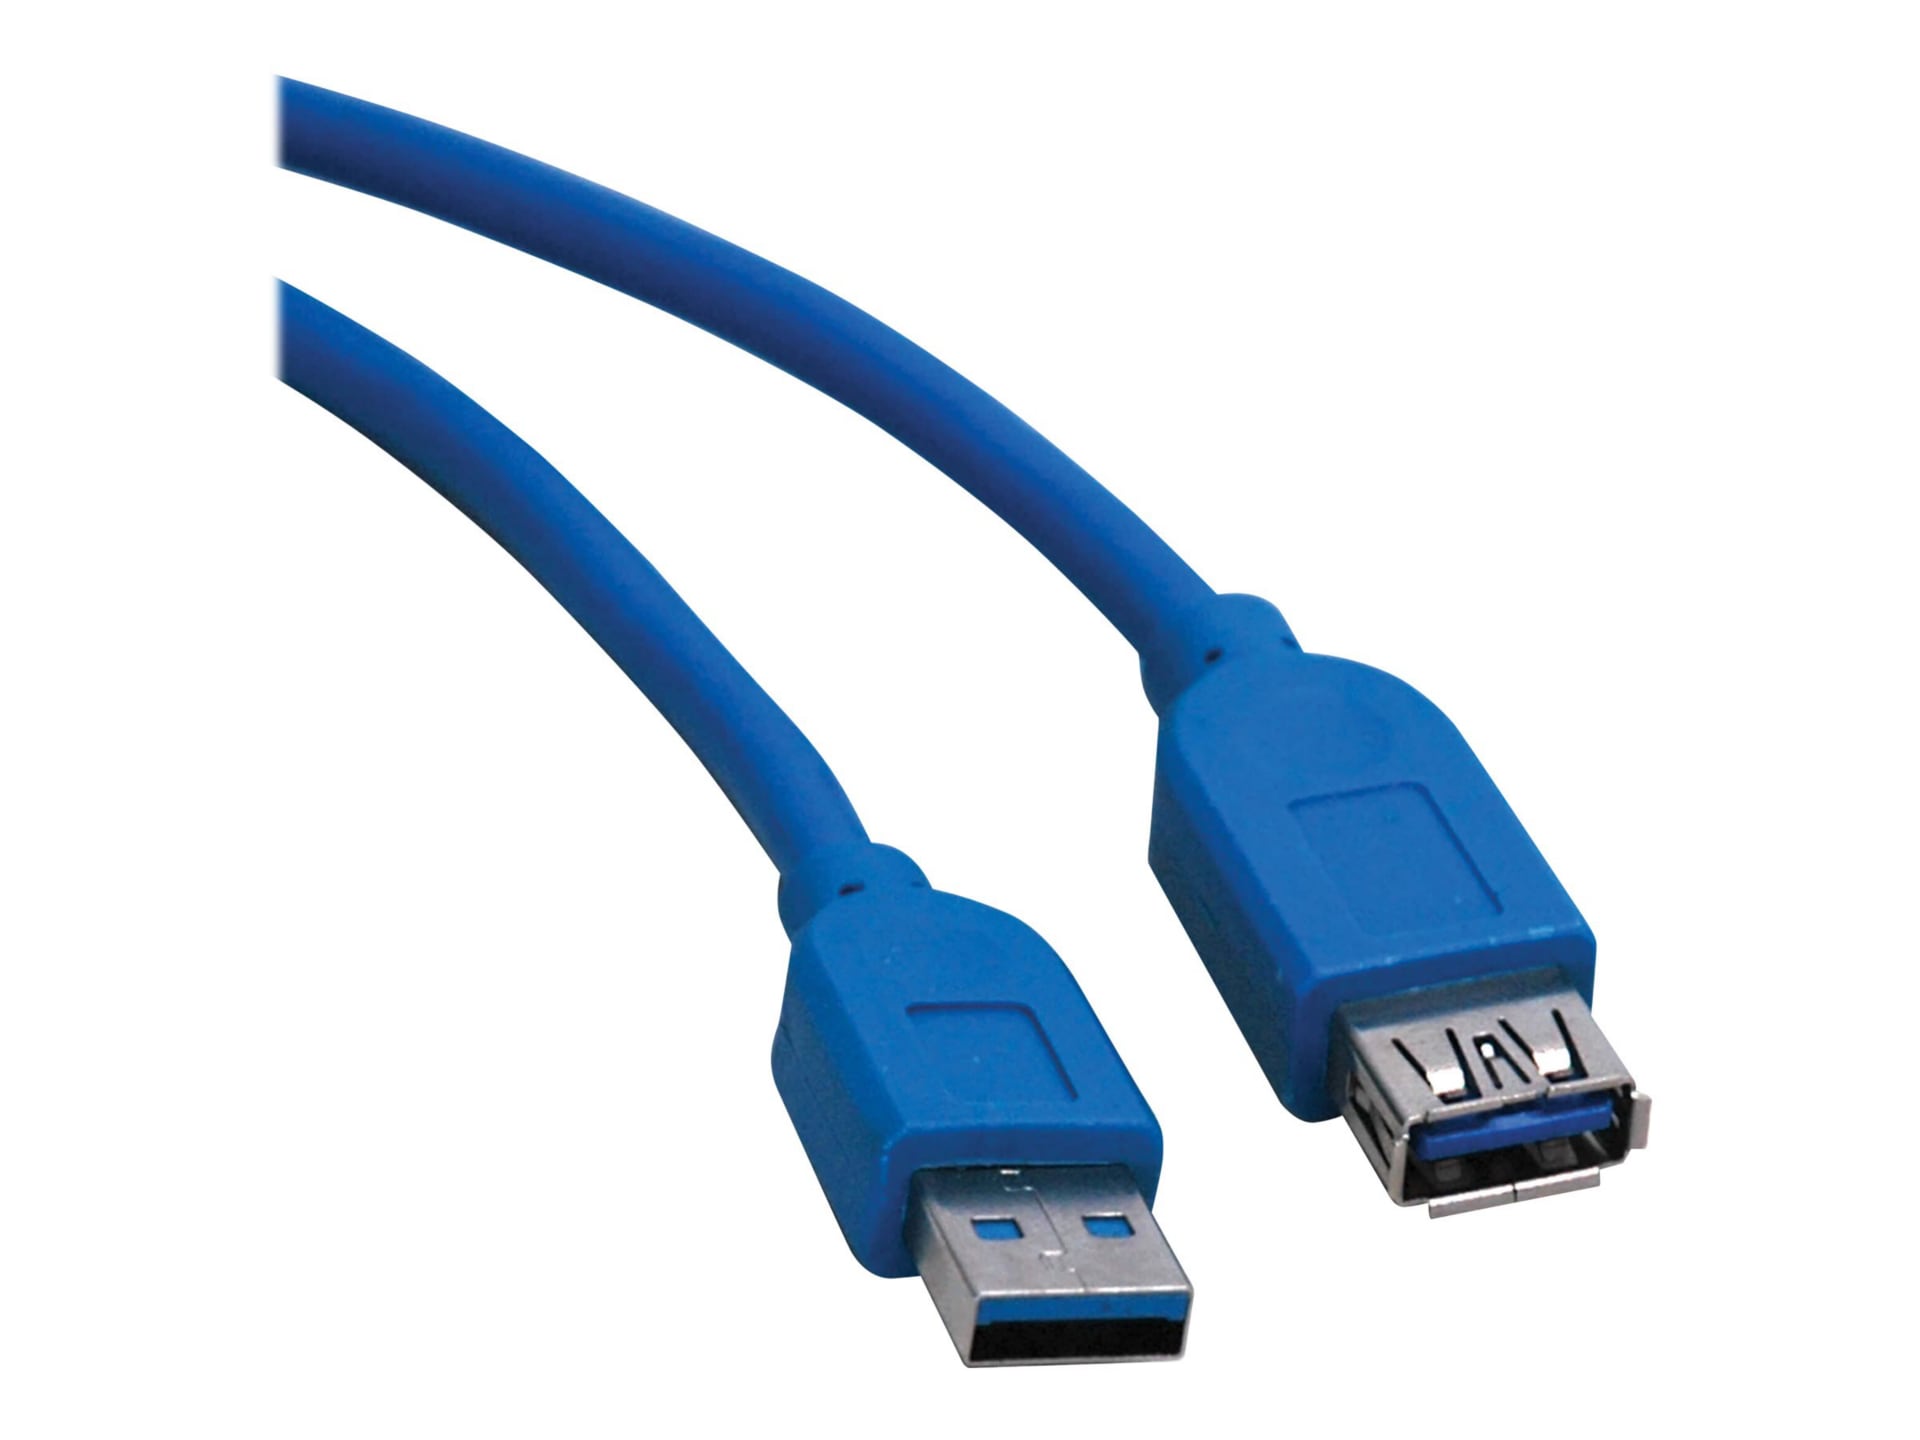 Eaton Tripp Lite Series USB 3.0 SuperSpeed Extension Cable (A M/F), Blue, 10 ft. (3.05 m) - USB extension cable - USB